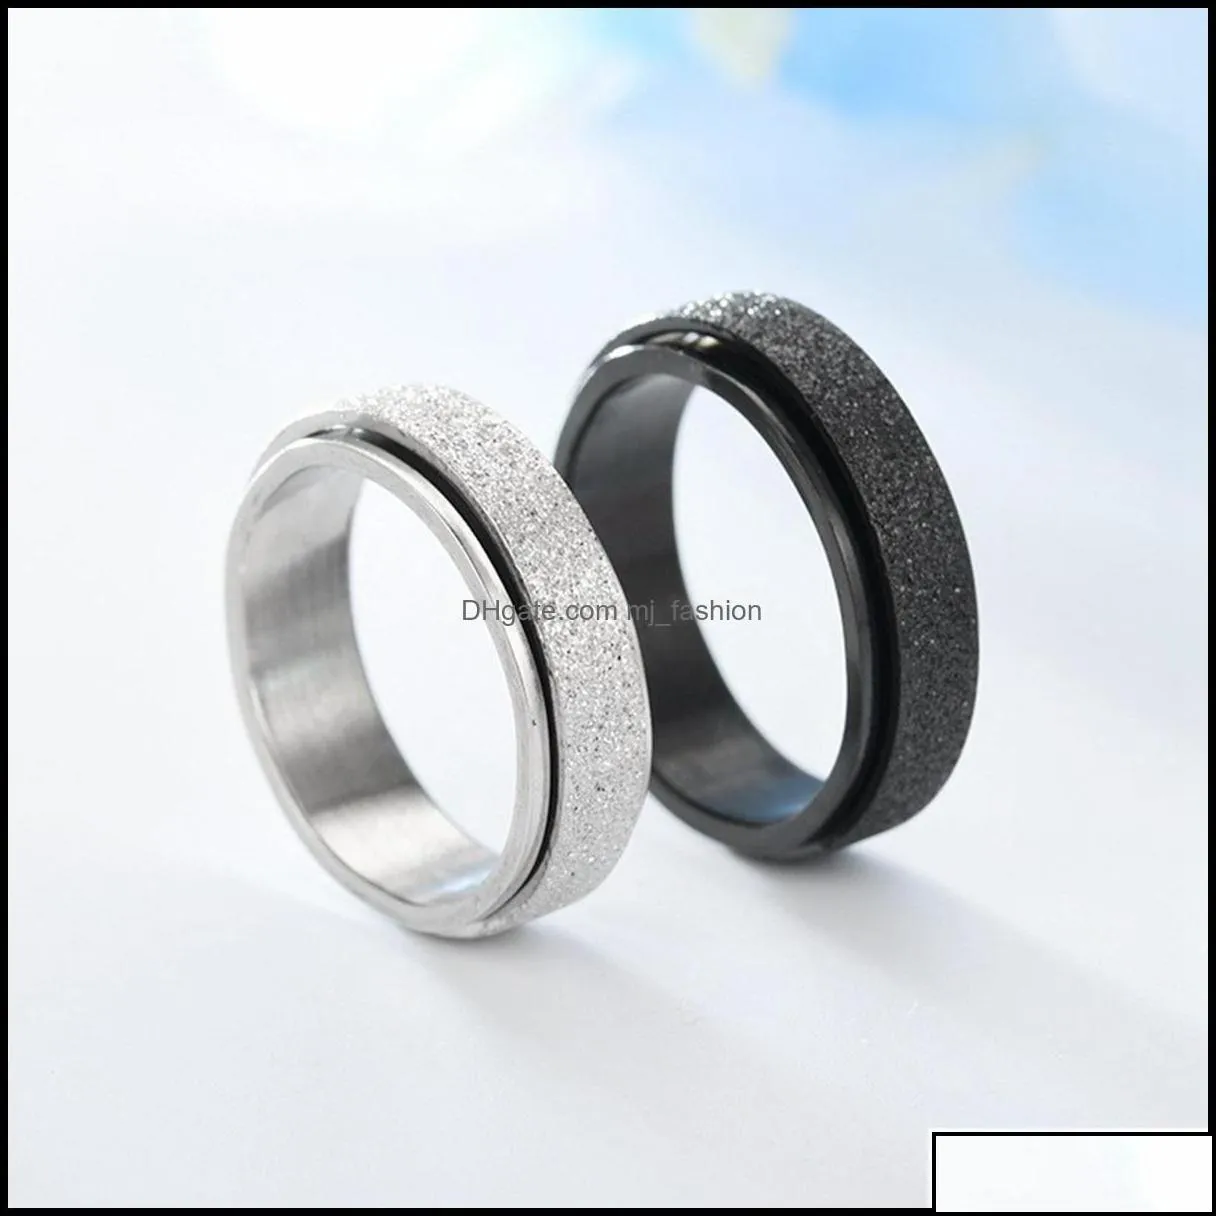 band rings women steel ring men girl boy anxiety relief 6mm fidget sier gold blue stainless jewelry perfect weddings parties celebrat